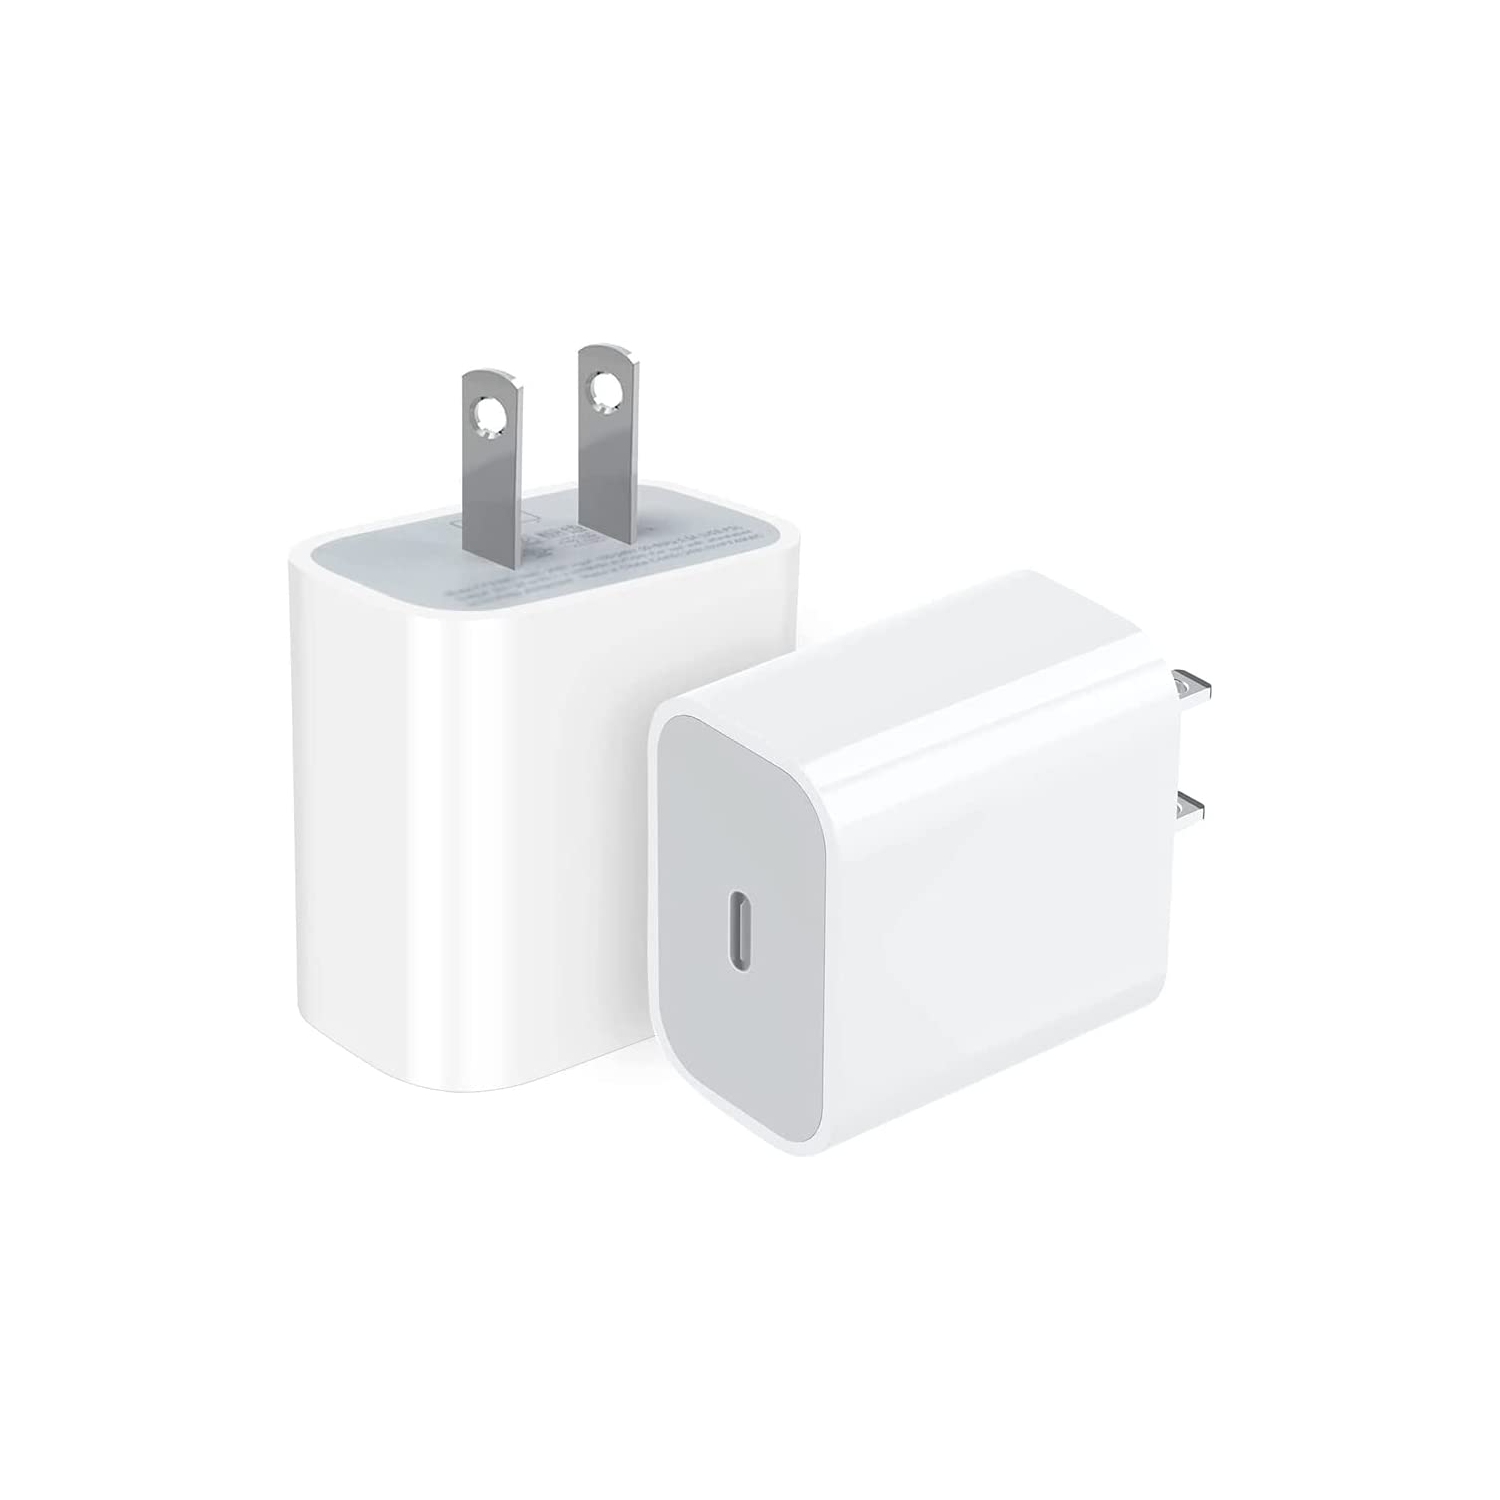 (CABLESHARK) (2PACK) Apple COMPATIBLE USB C Fast Charger 20W PD 3.0 USB C Wall Charger for iPhone 11 iPhone 13 / Pro / Max iPhone 12 / Pro / Max iPad Air Mini Pro plug